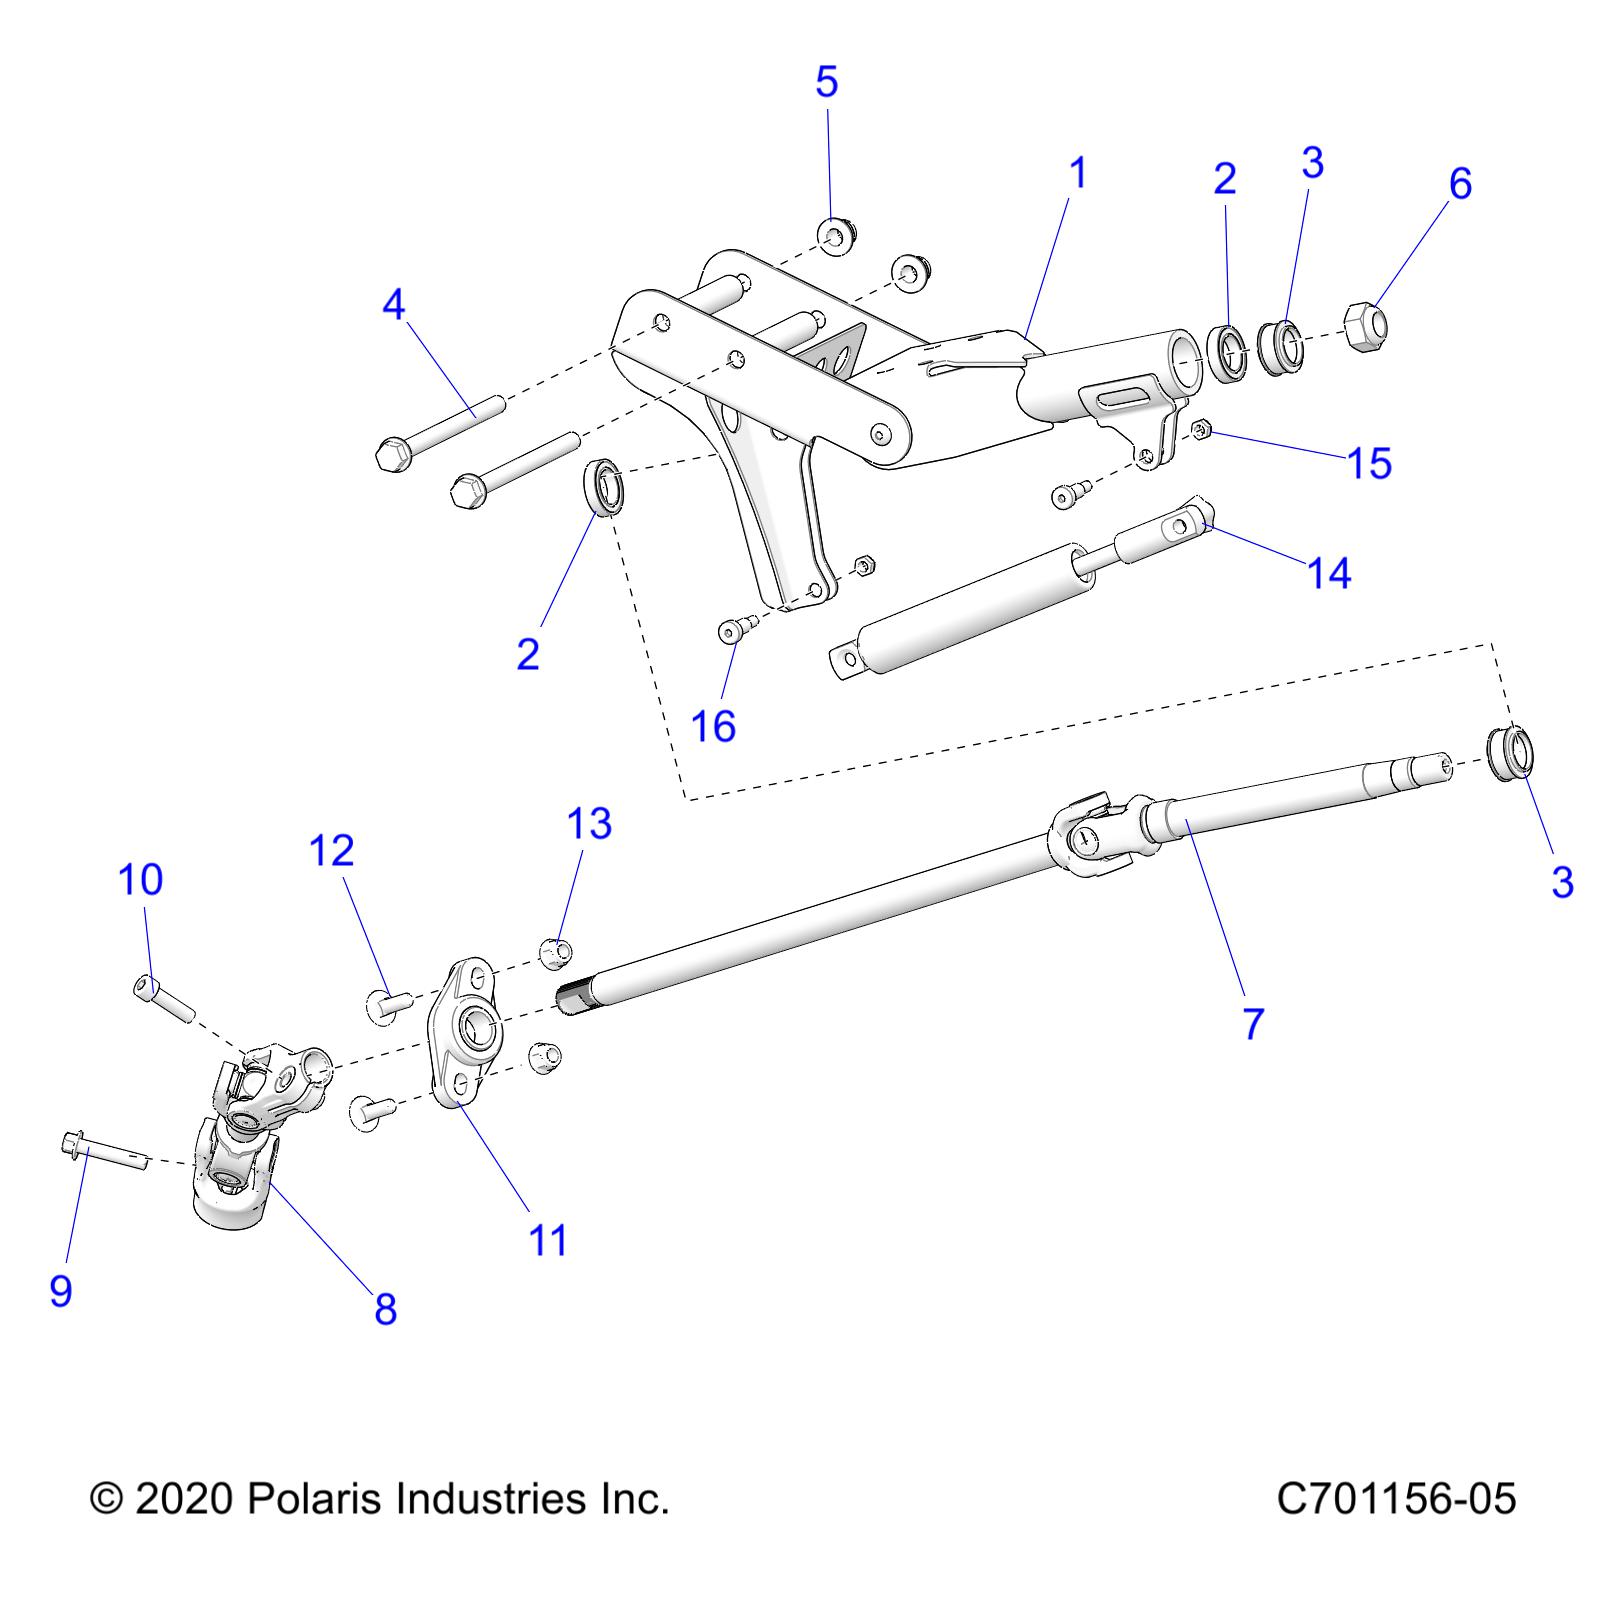 Part Number : 7520298 CAR SCREW  RIGHT  8 MM X 1.25